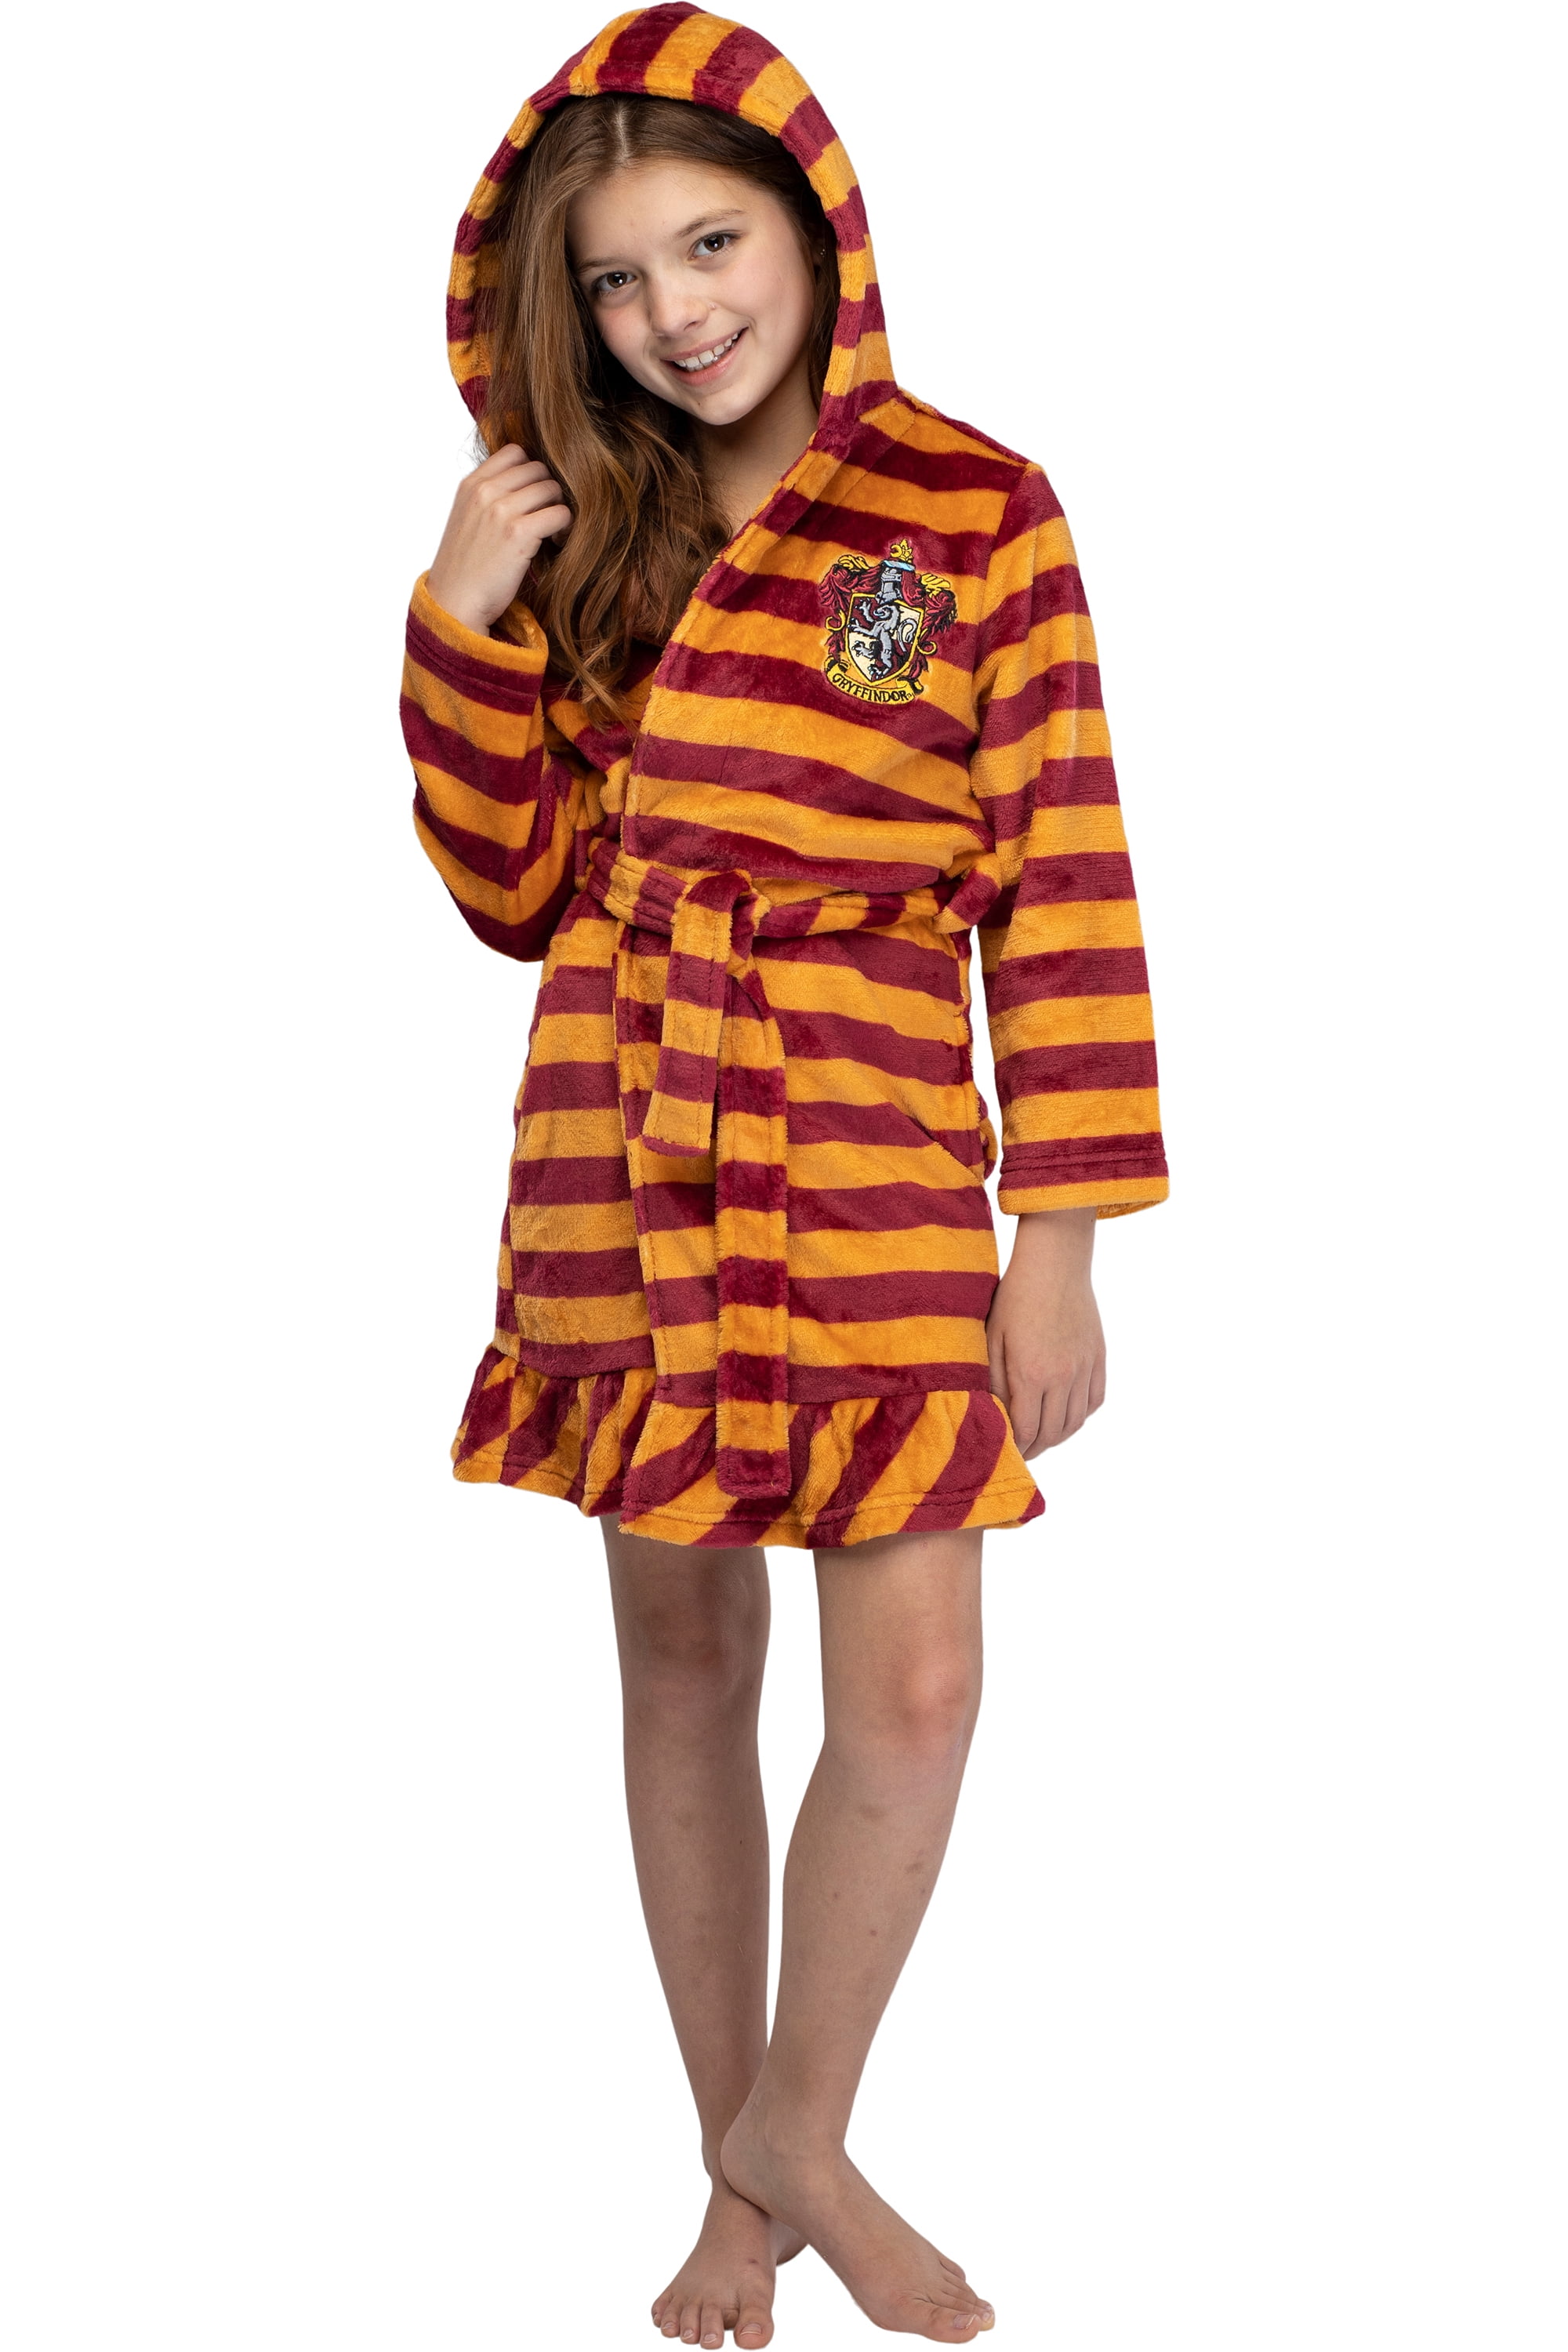 Licensed Boys Girls Harry Potter Dressing Gown Robe Age 7-8 Years Unisex Button Front 